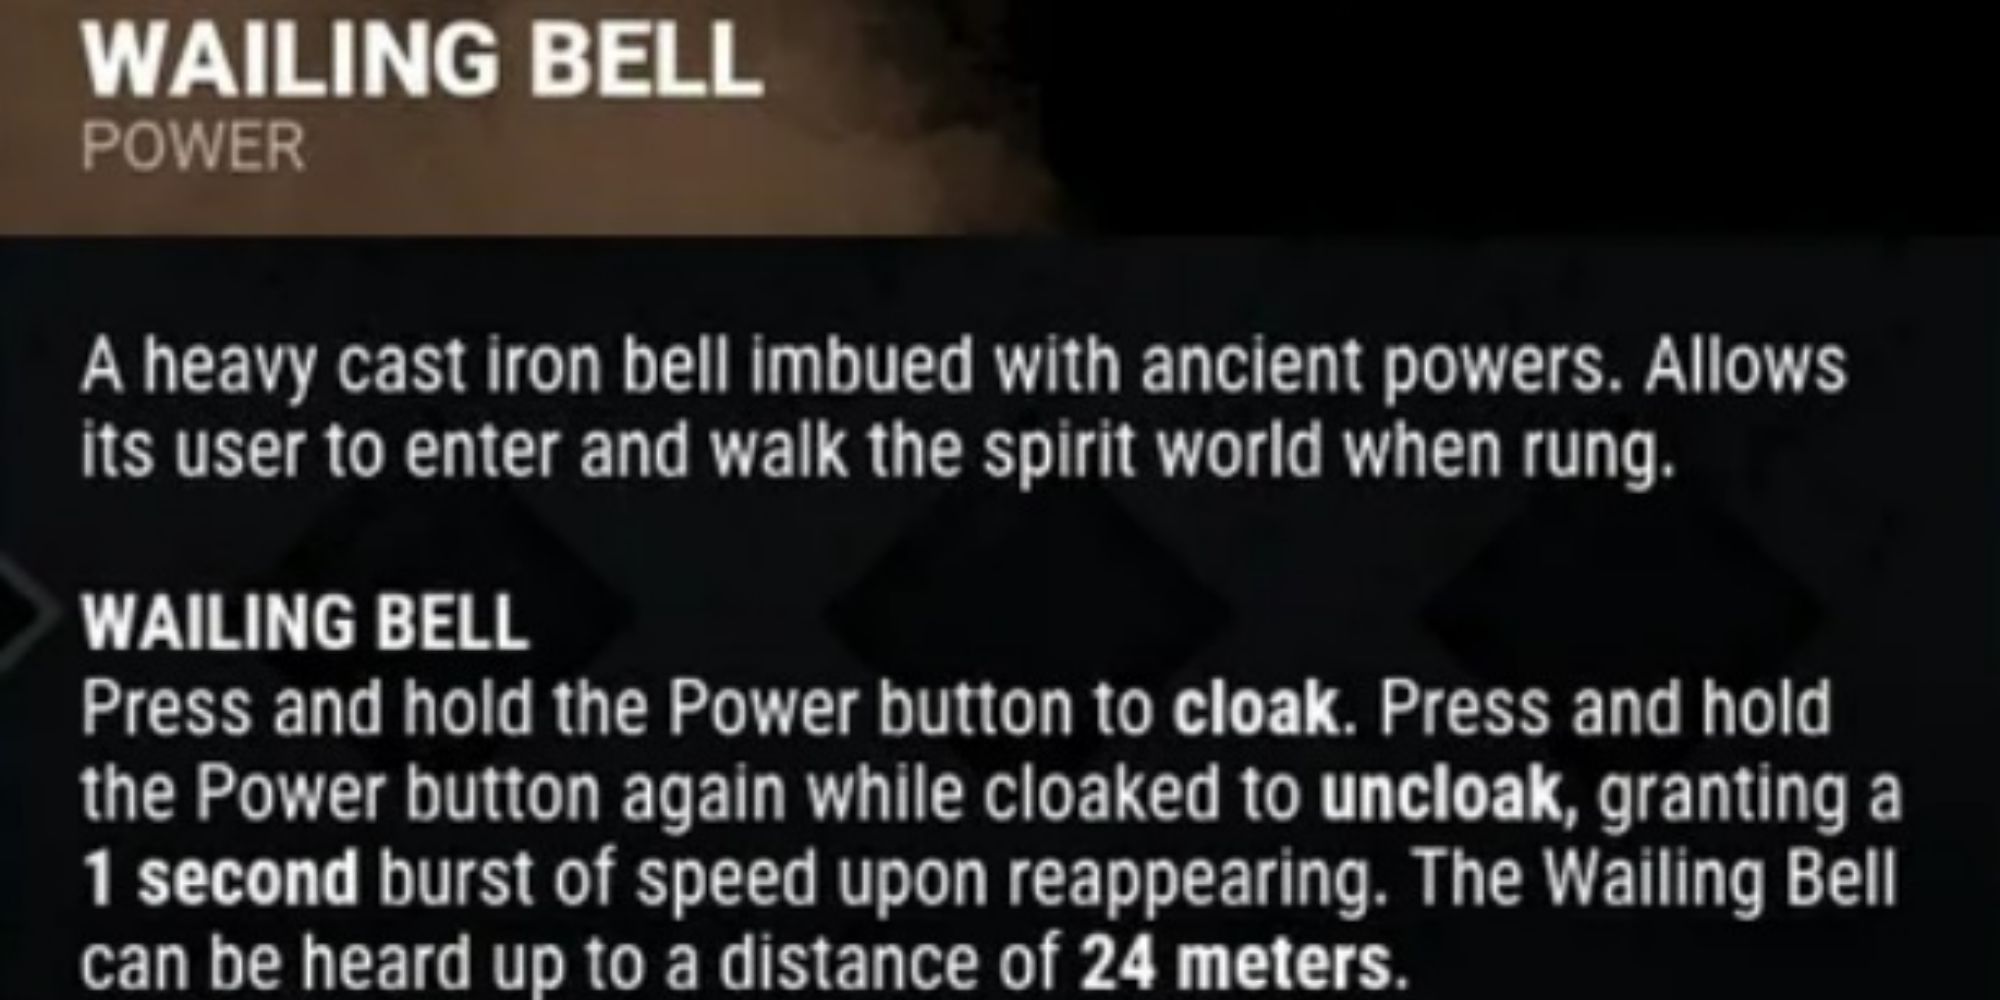 The power description of the Wailing Bell from Dead by Daylight